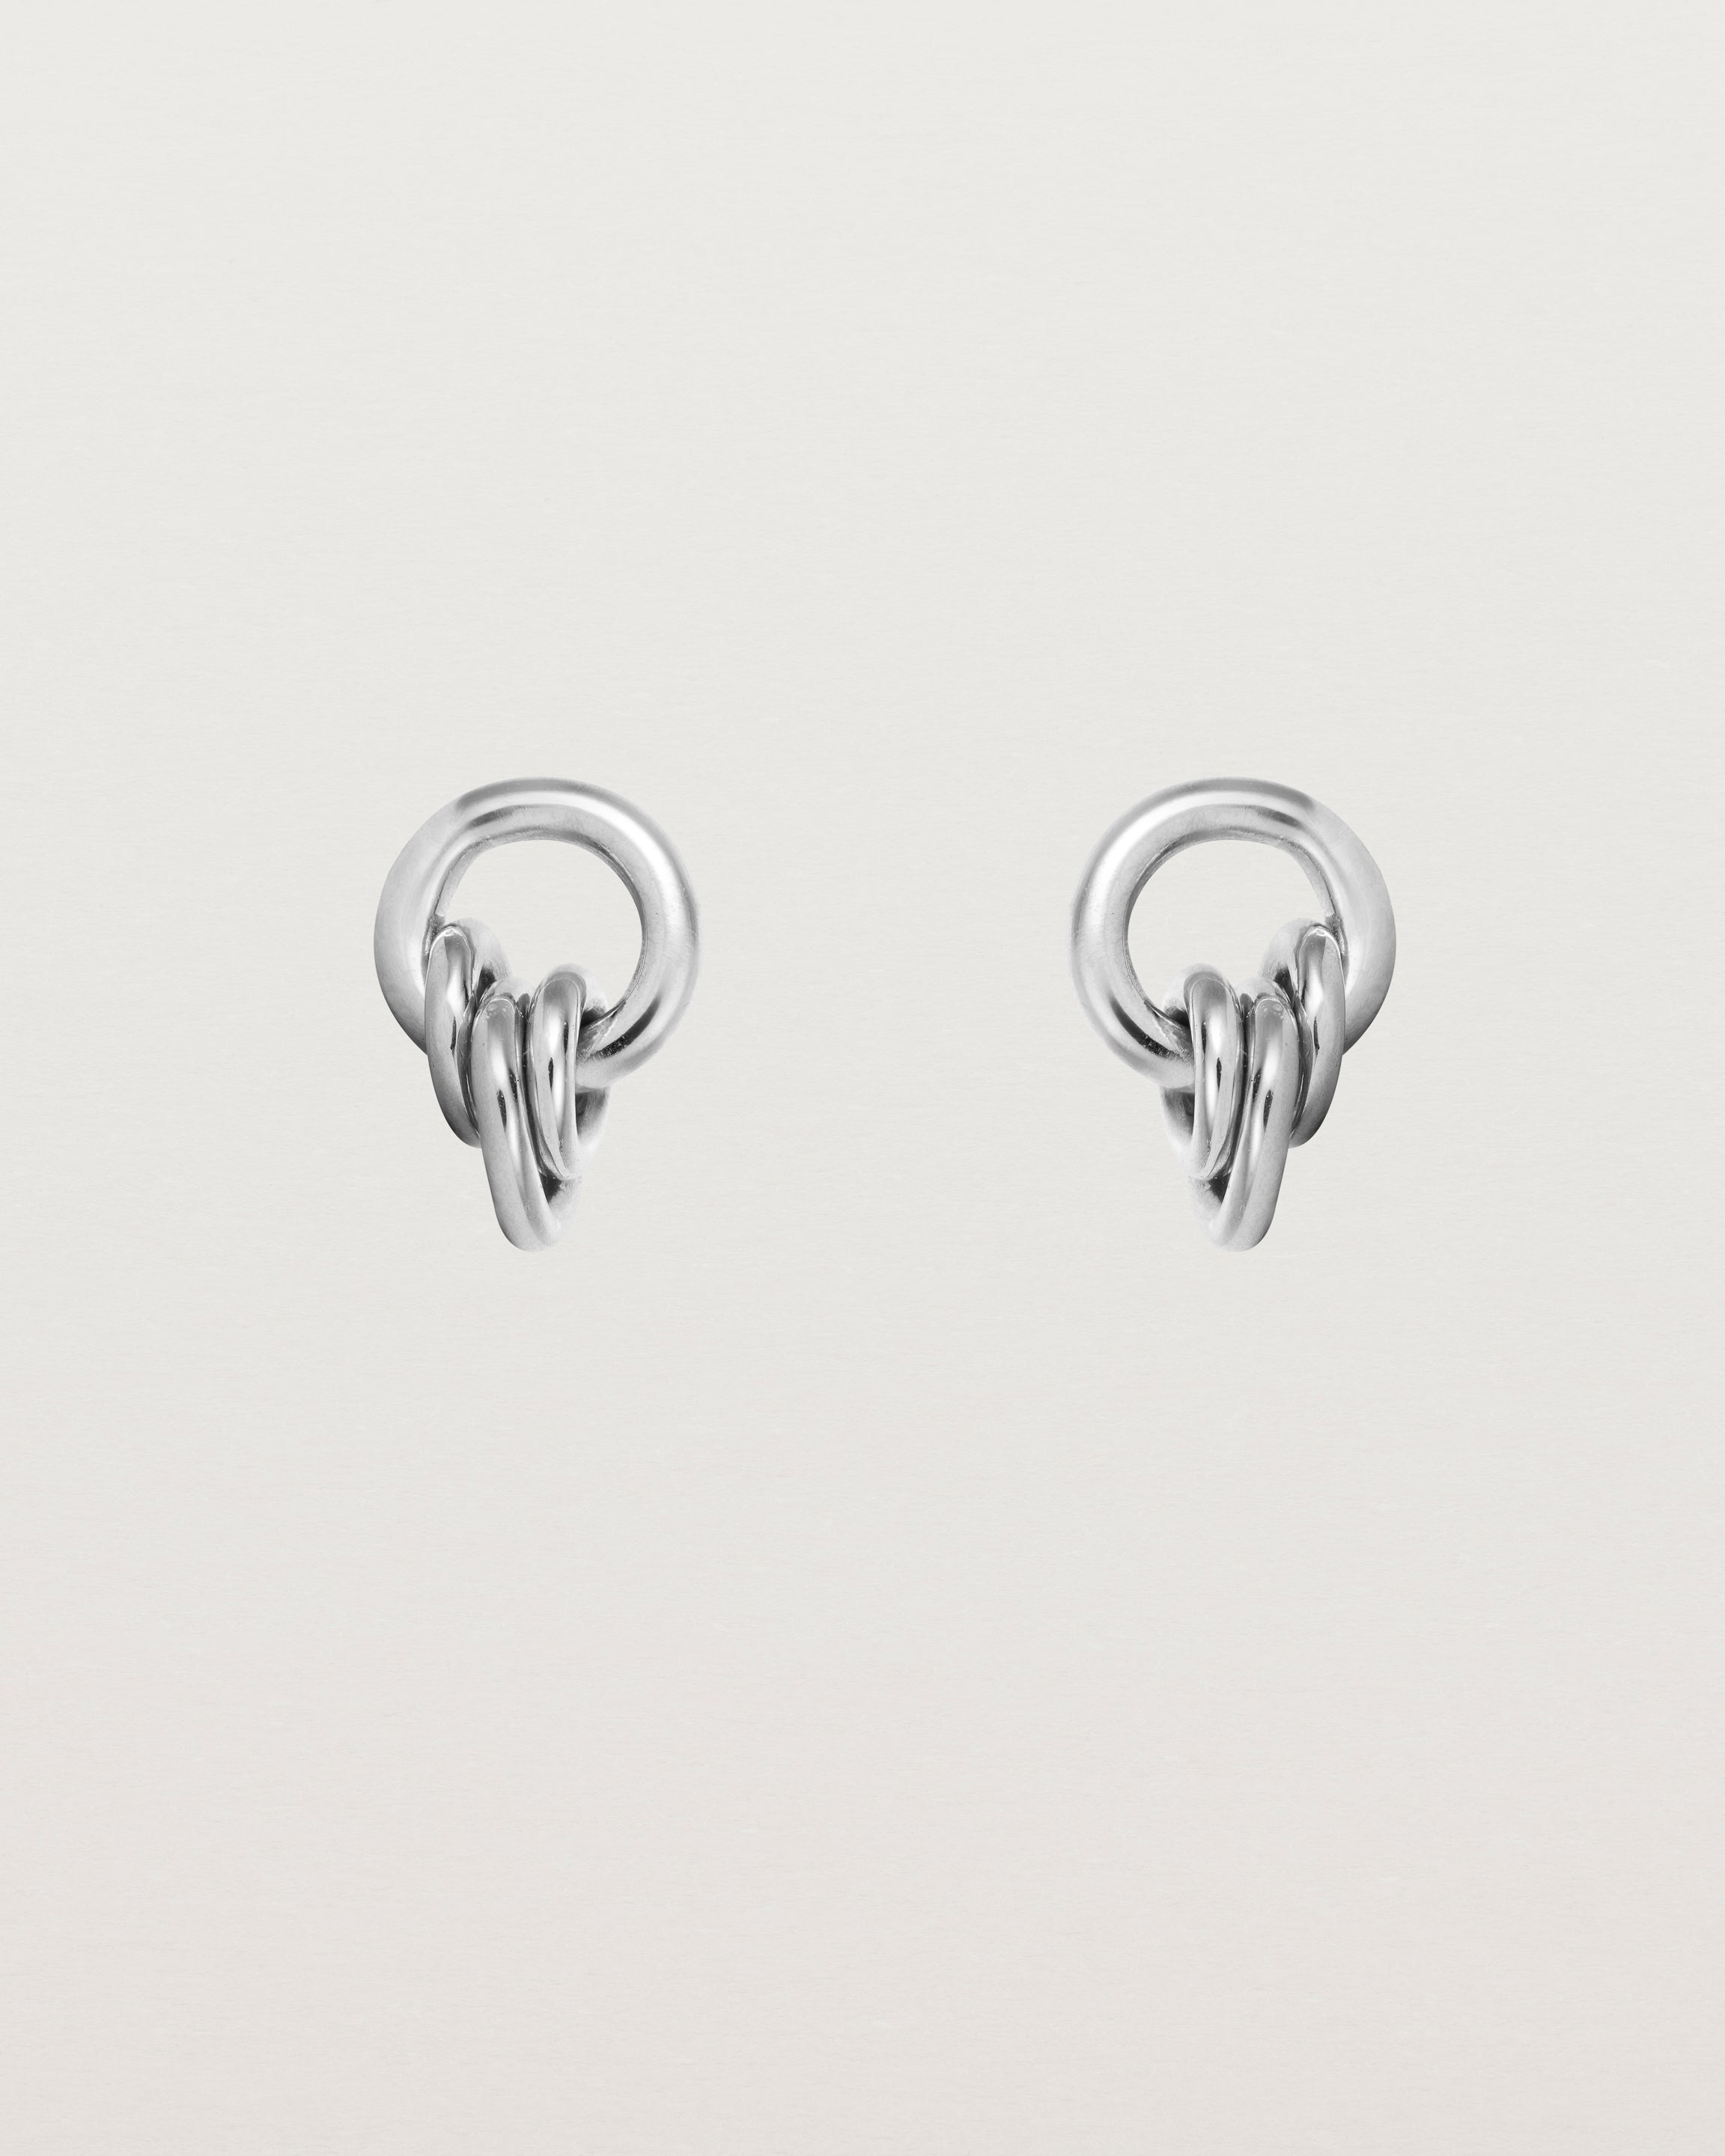 A pair of sterling silver studs with three mini hoops attached